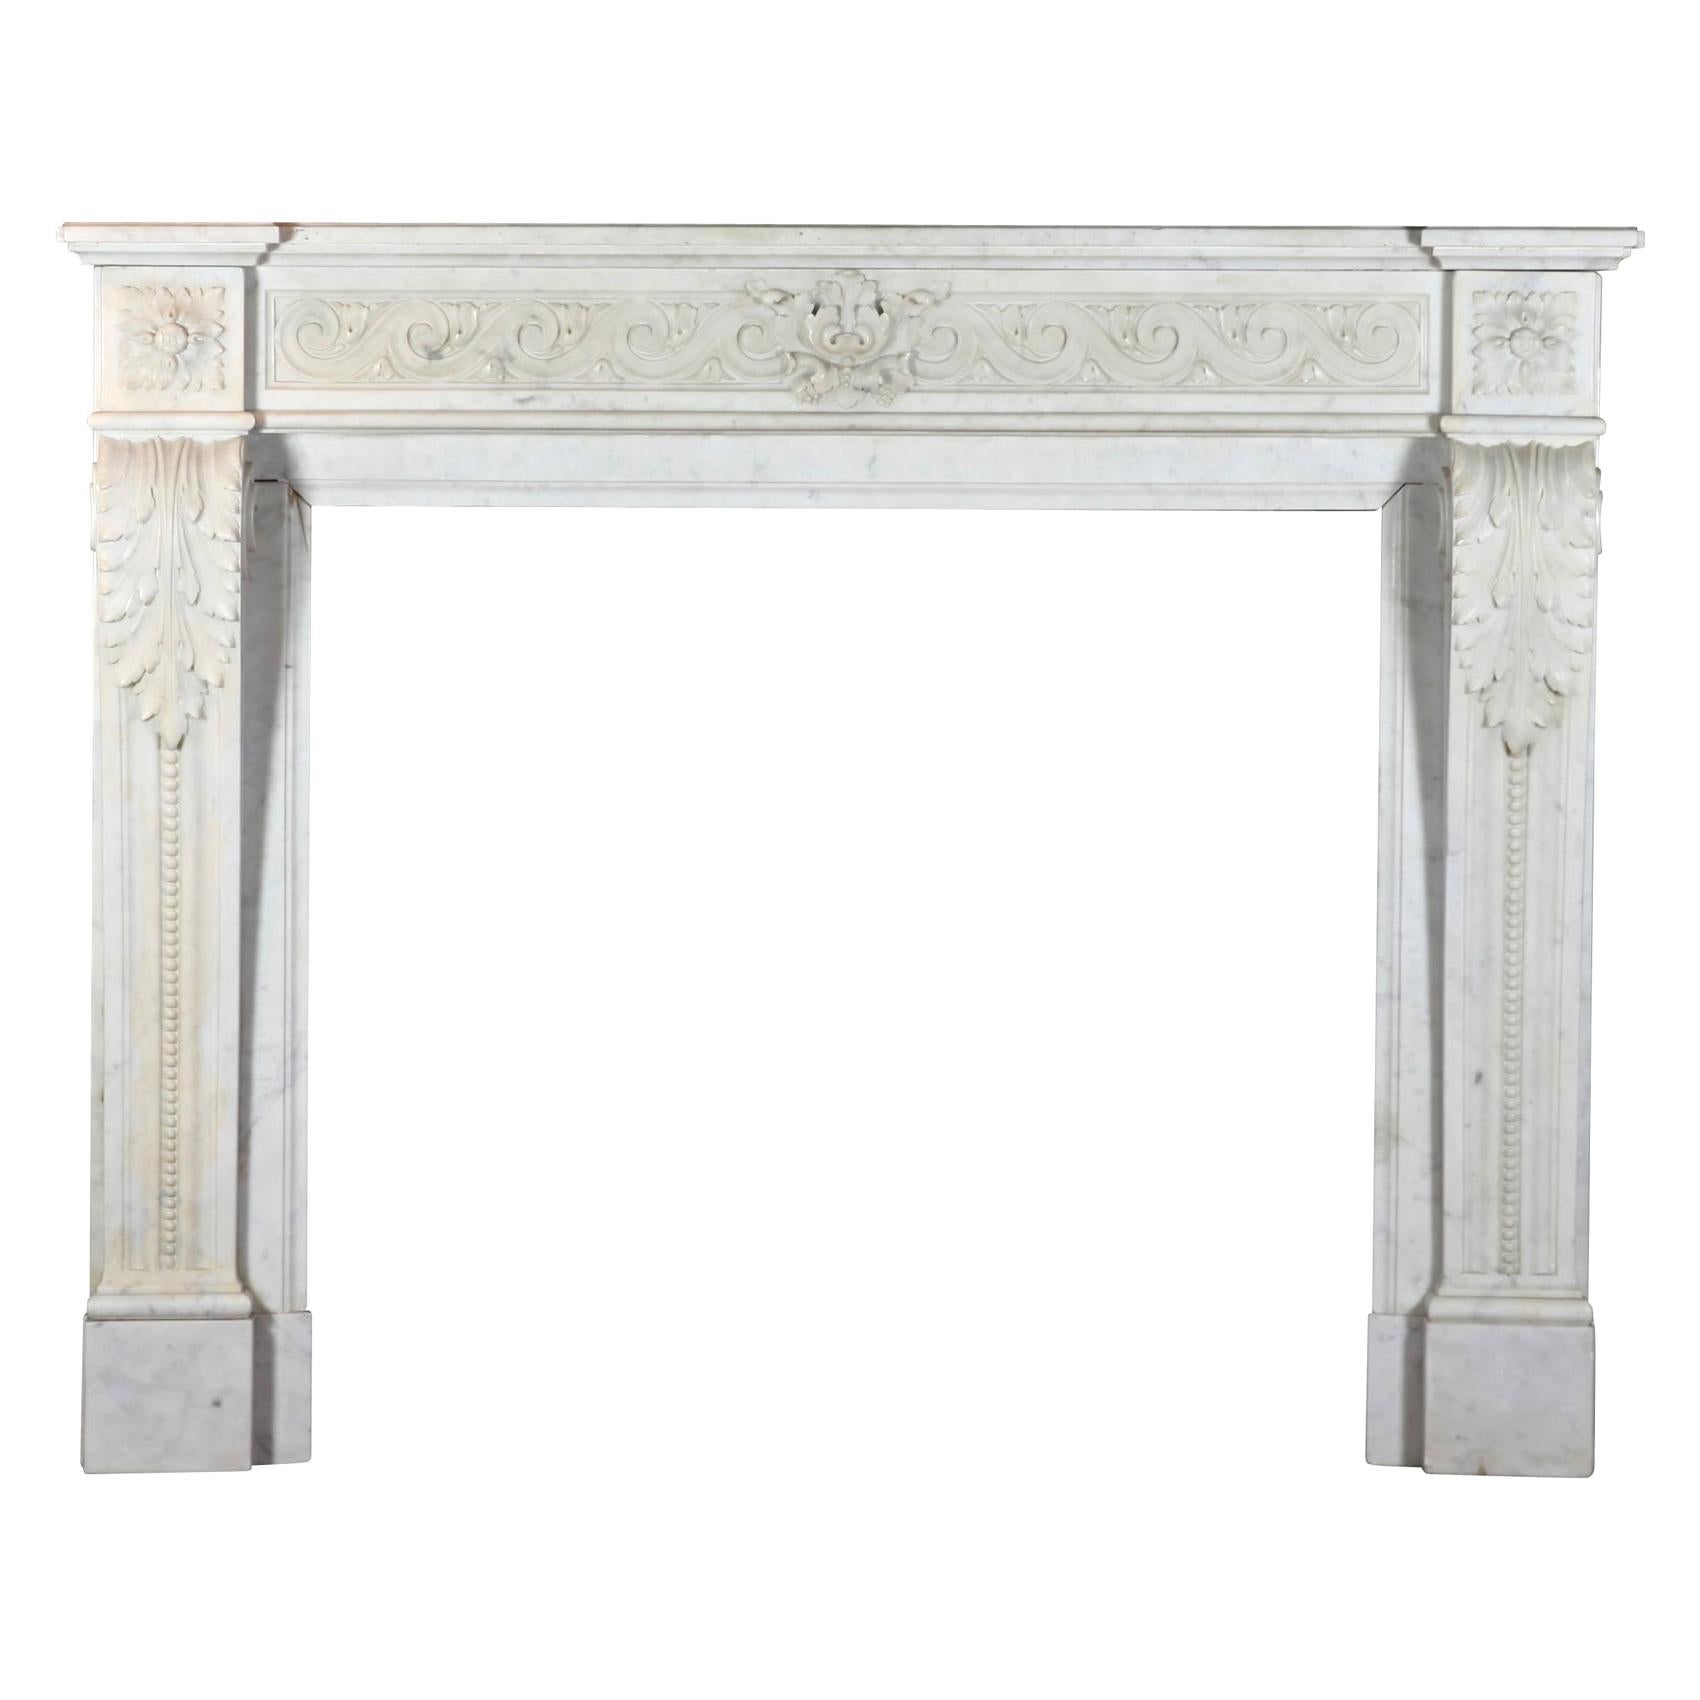 Fine Classic Vintage Fireplace Surround in White Carrara Marble